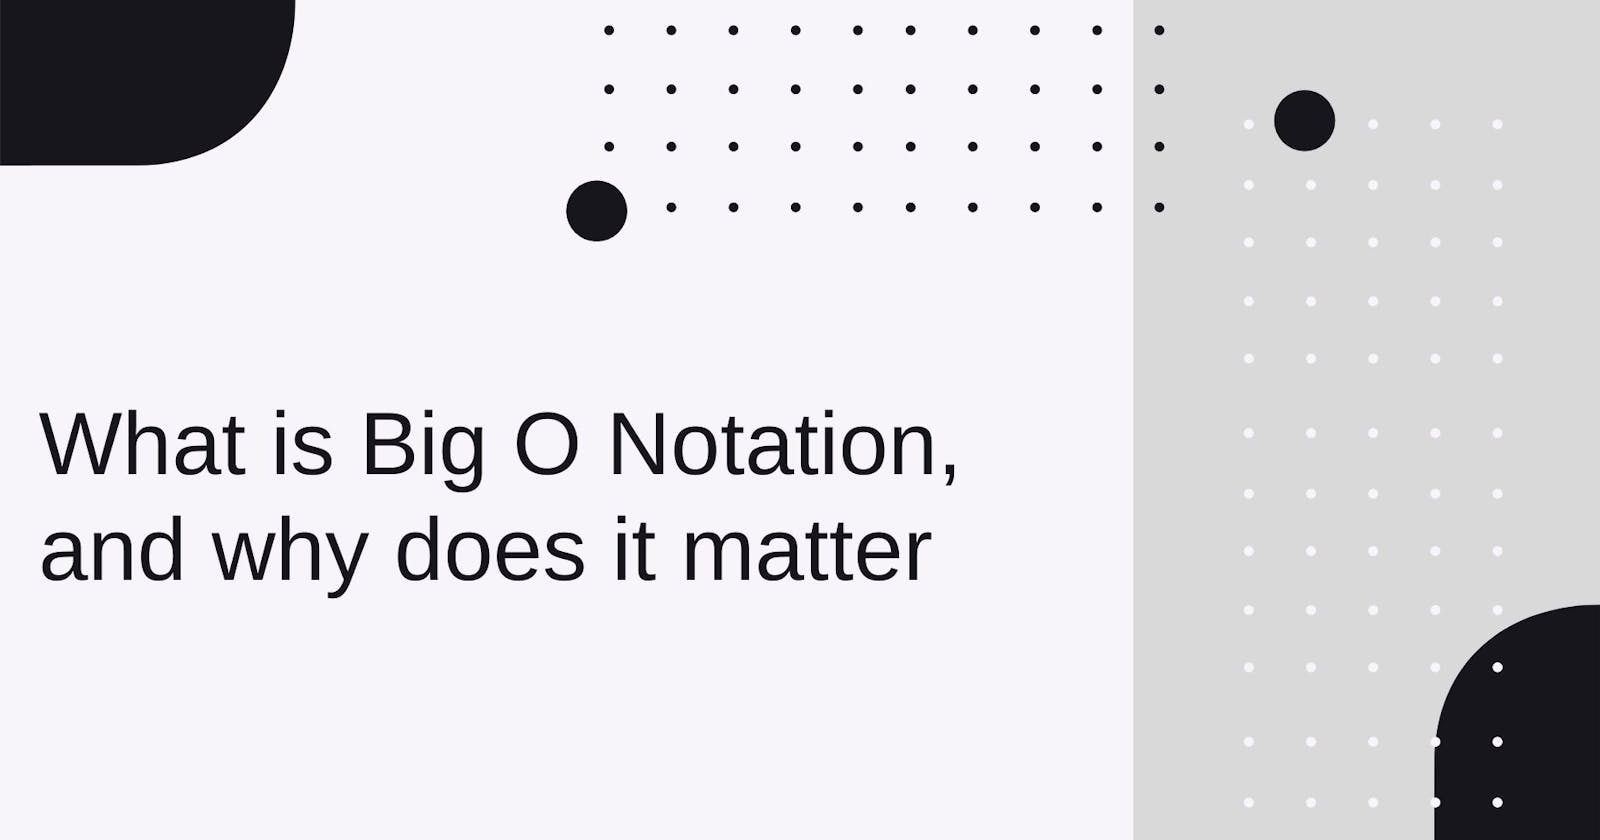 What is Big O Notation, and why does it matter